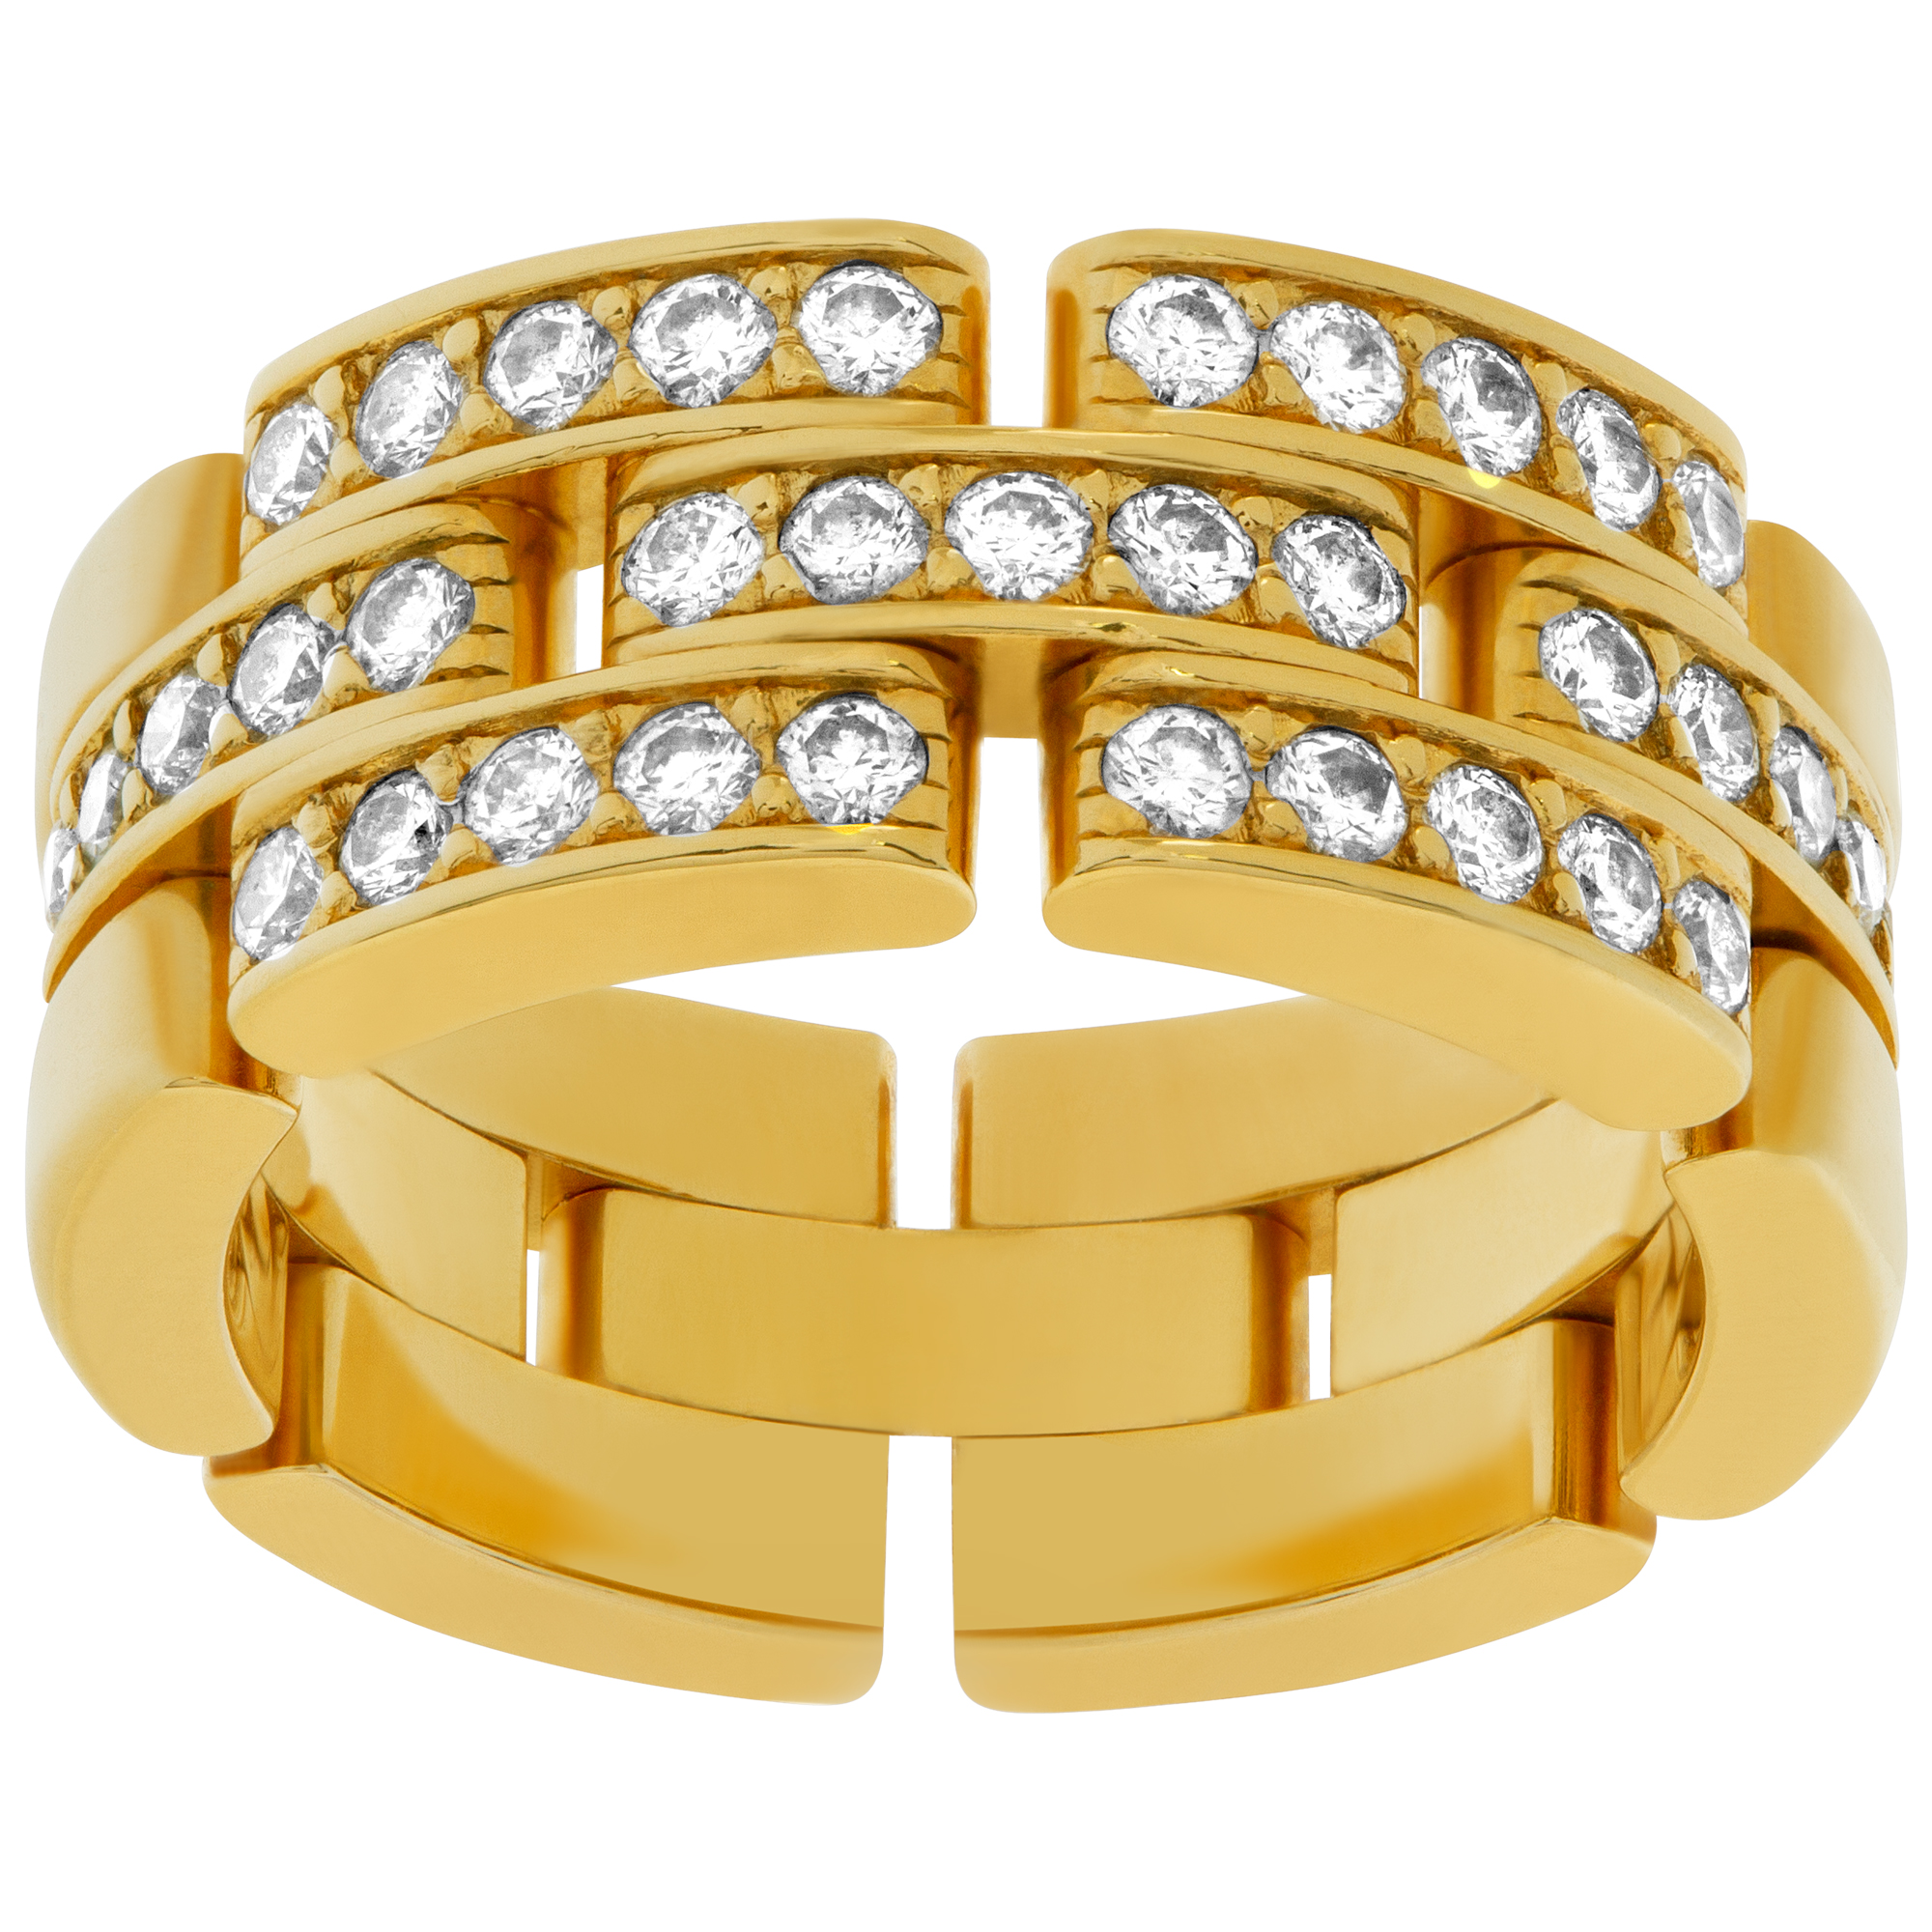 Elegant Cartier Panthere link ring 18k yellow gold with diamonds. image 1